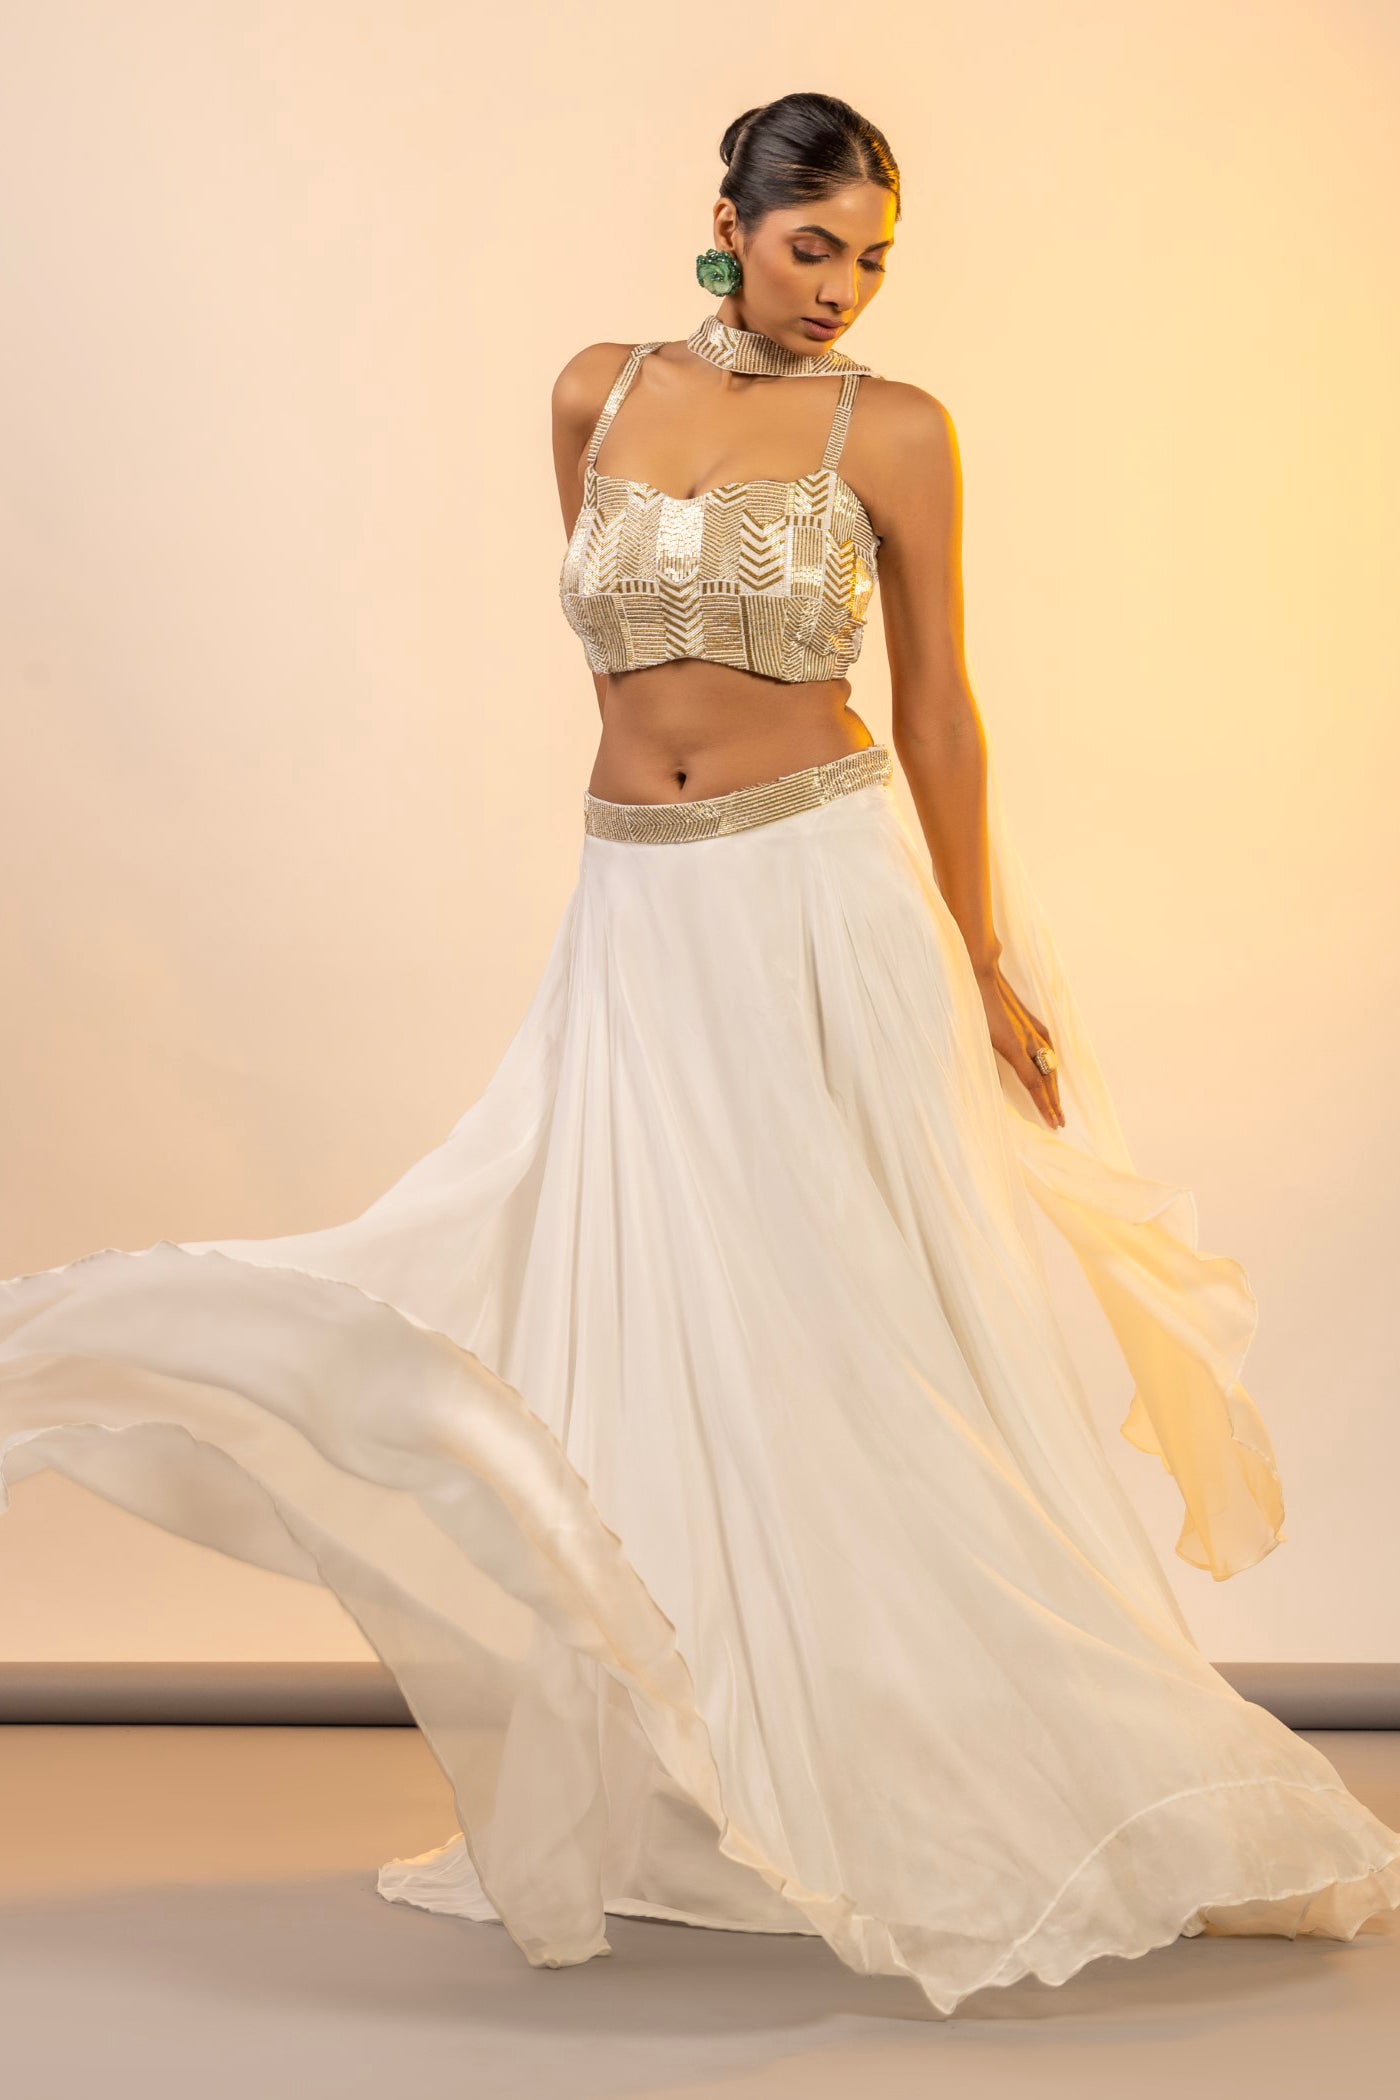 Organza crop top and skirt with pearl cutdana work